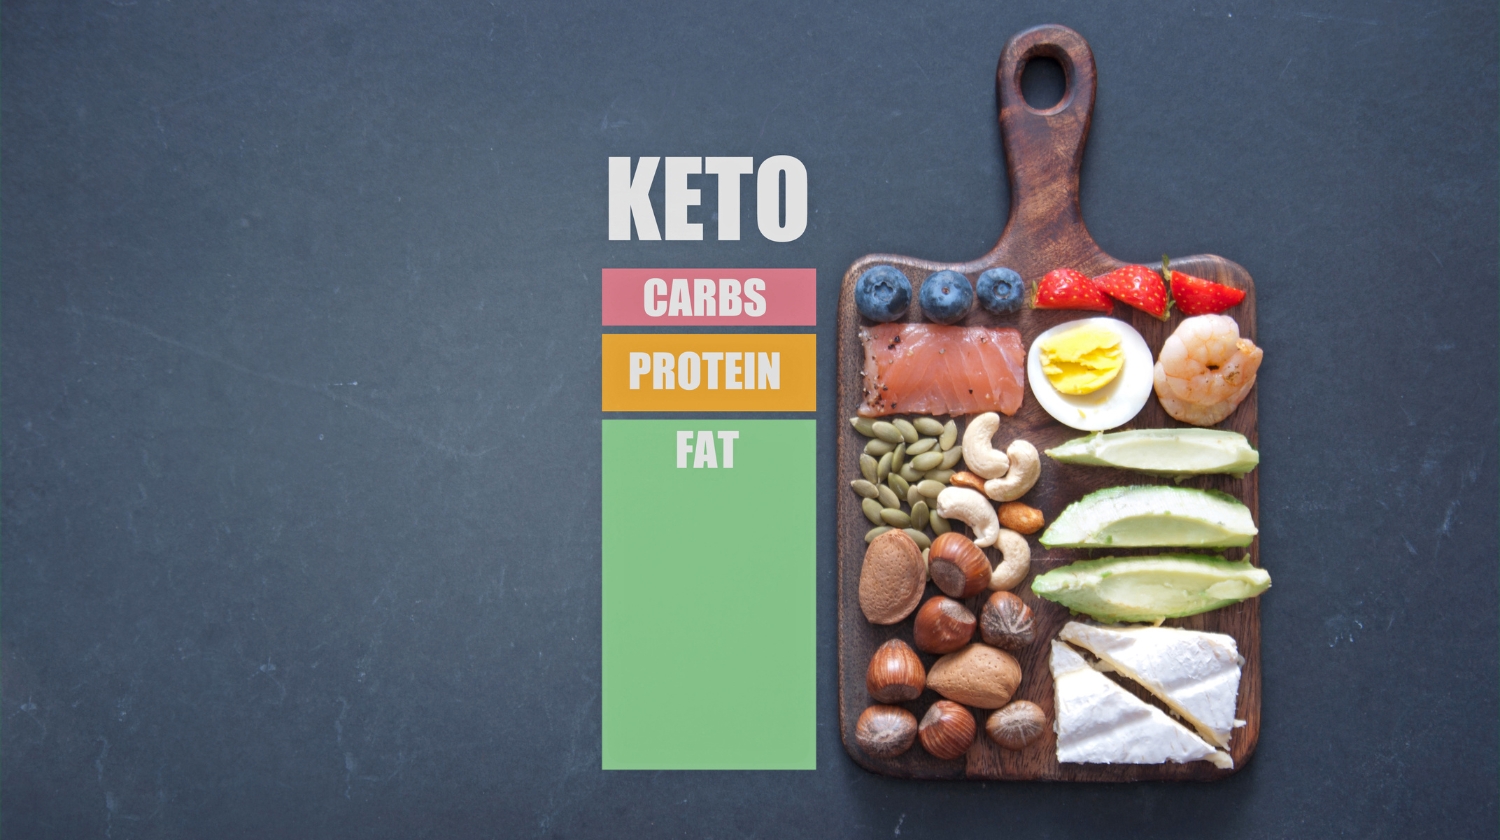 How Many Carbs Can You Have On a Keto Diet?